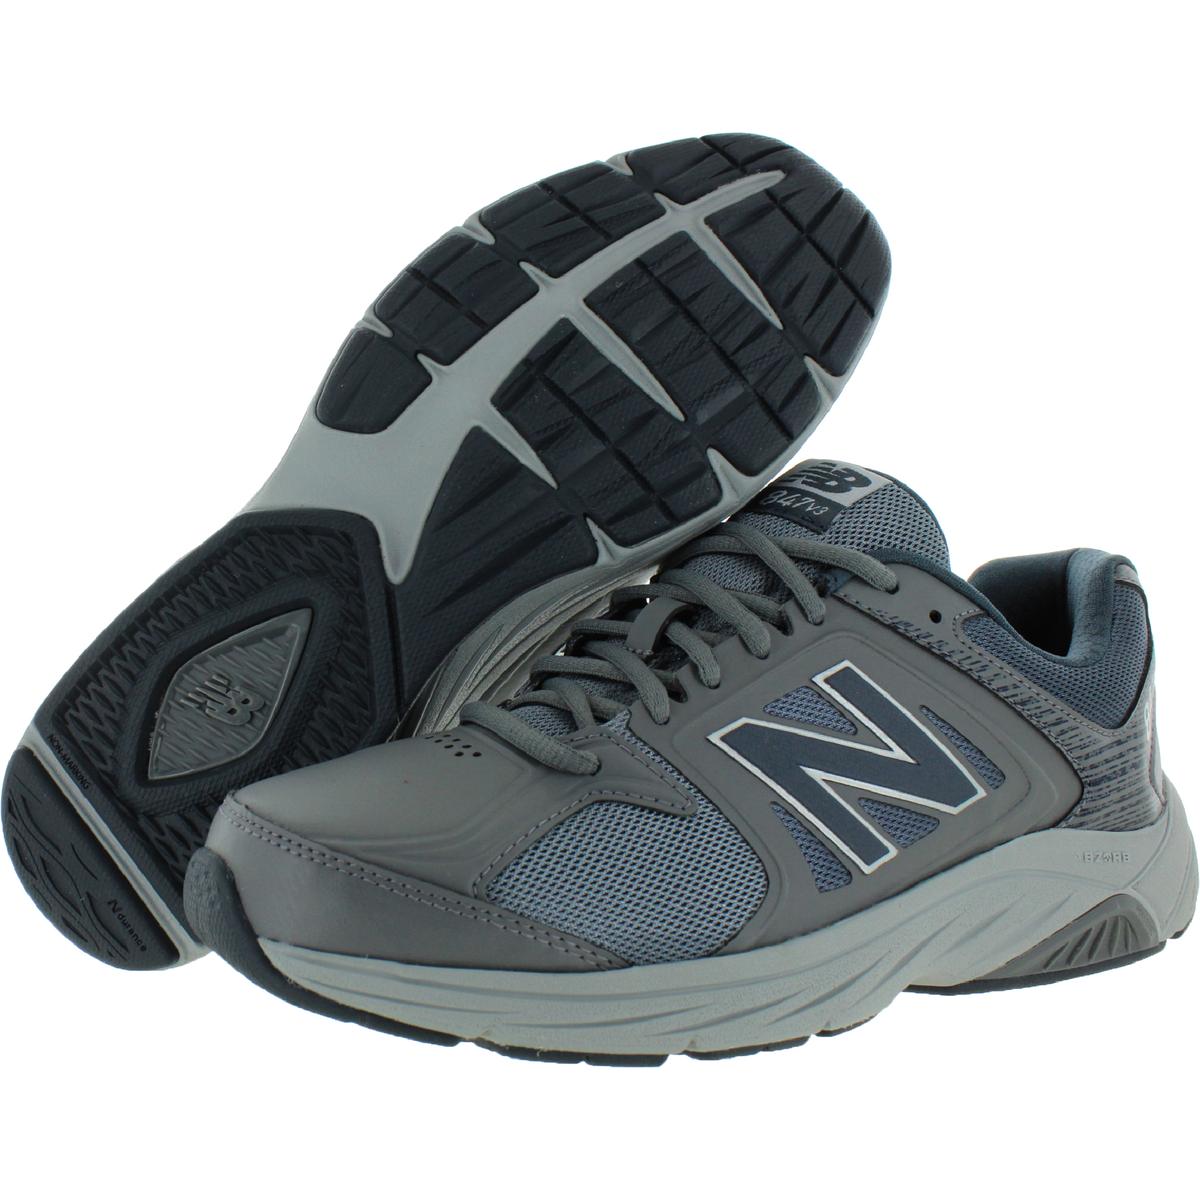 New Balance Mens 847 V3 Faux Leather Trainer Walking Shoes Sneakers ...